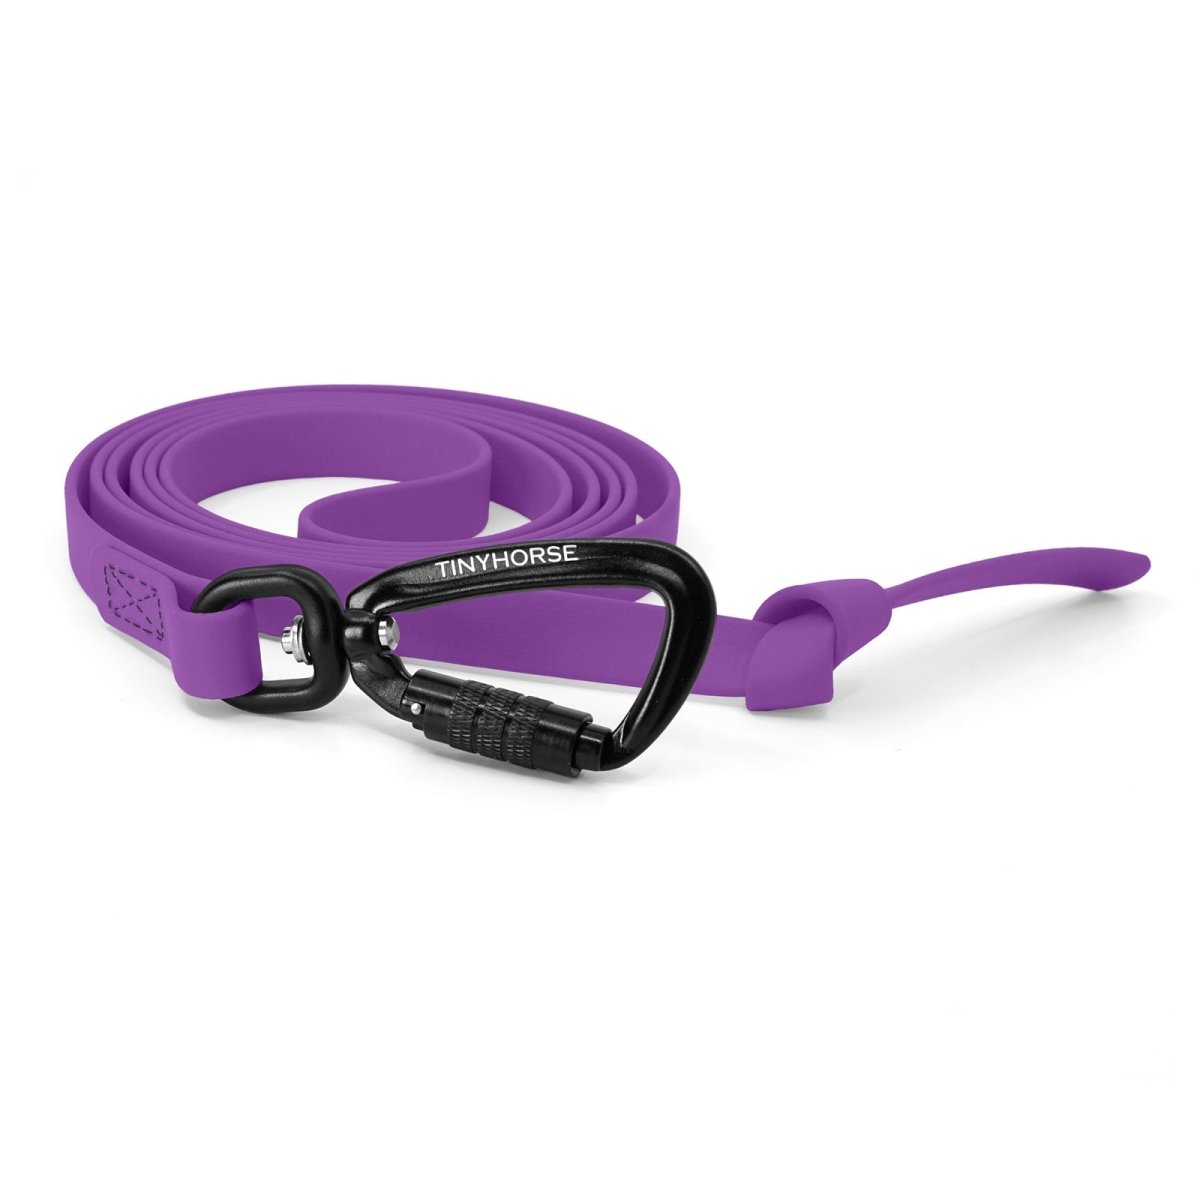 A lilac-coloured Step Line made of BioThane and 2 auto-locking carabiners